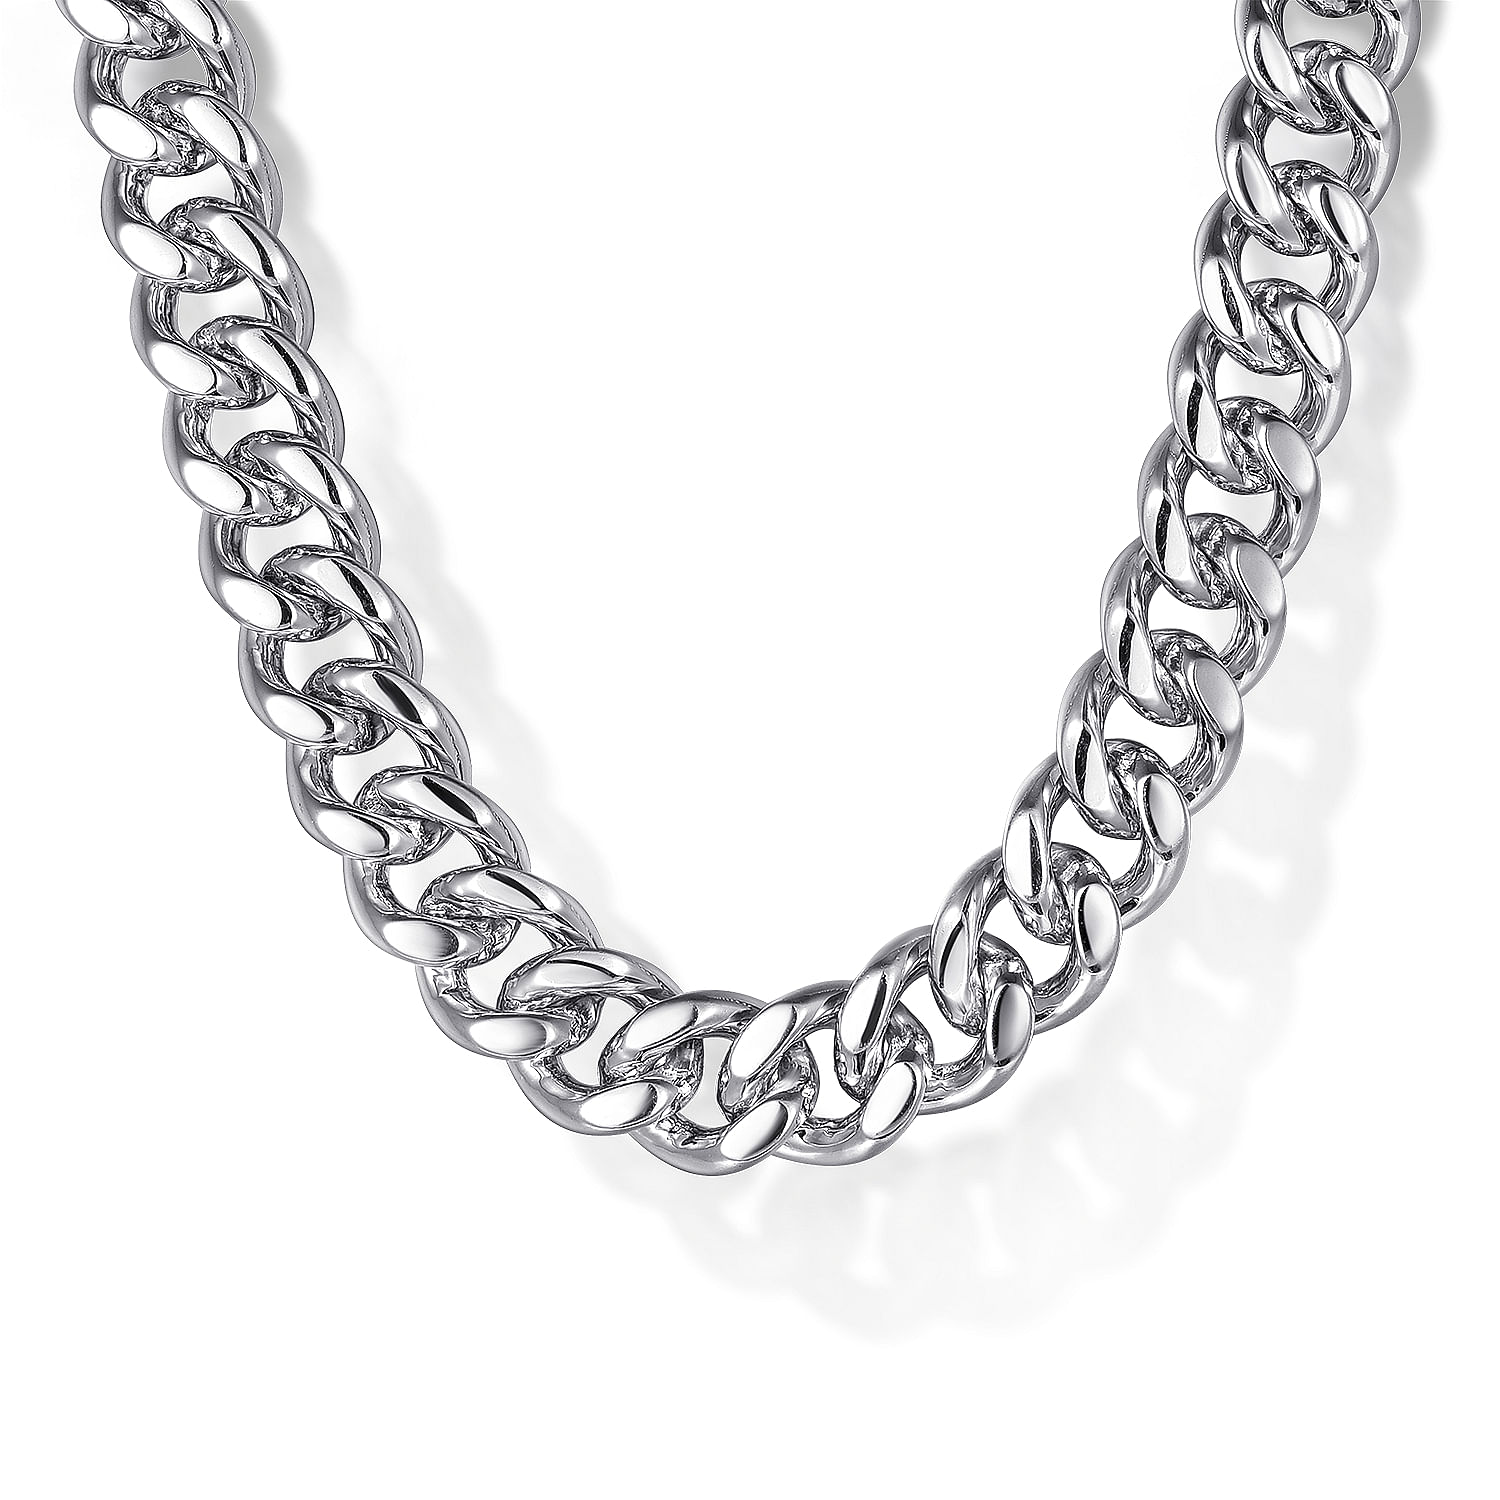 20 Inch 925 Sterling Silver Solid Cuban Link Chain Necklace